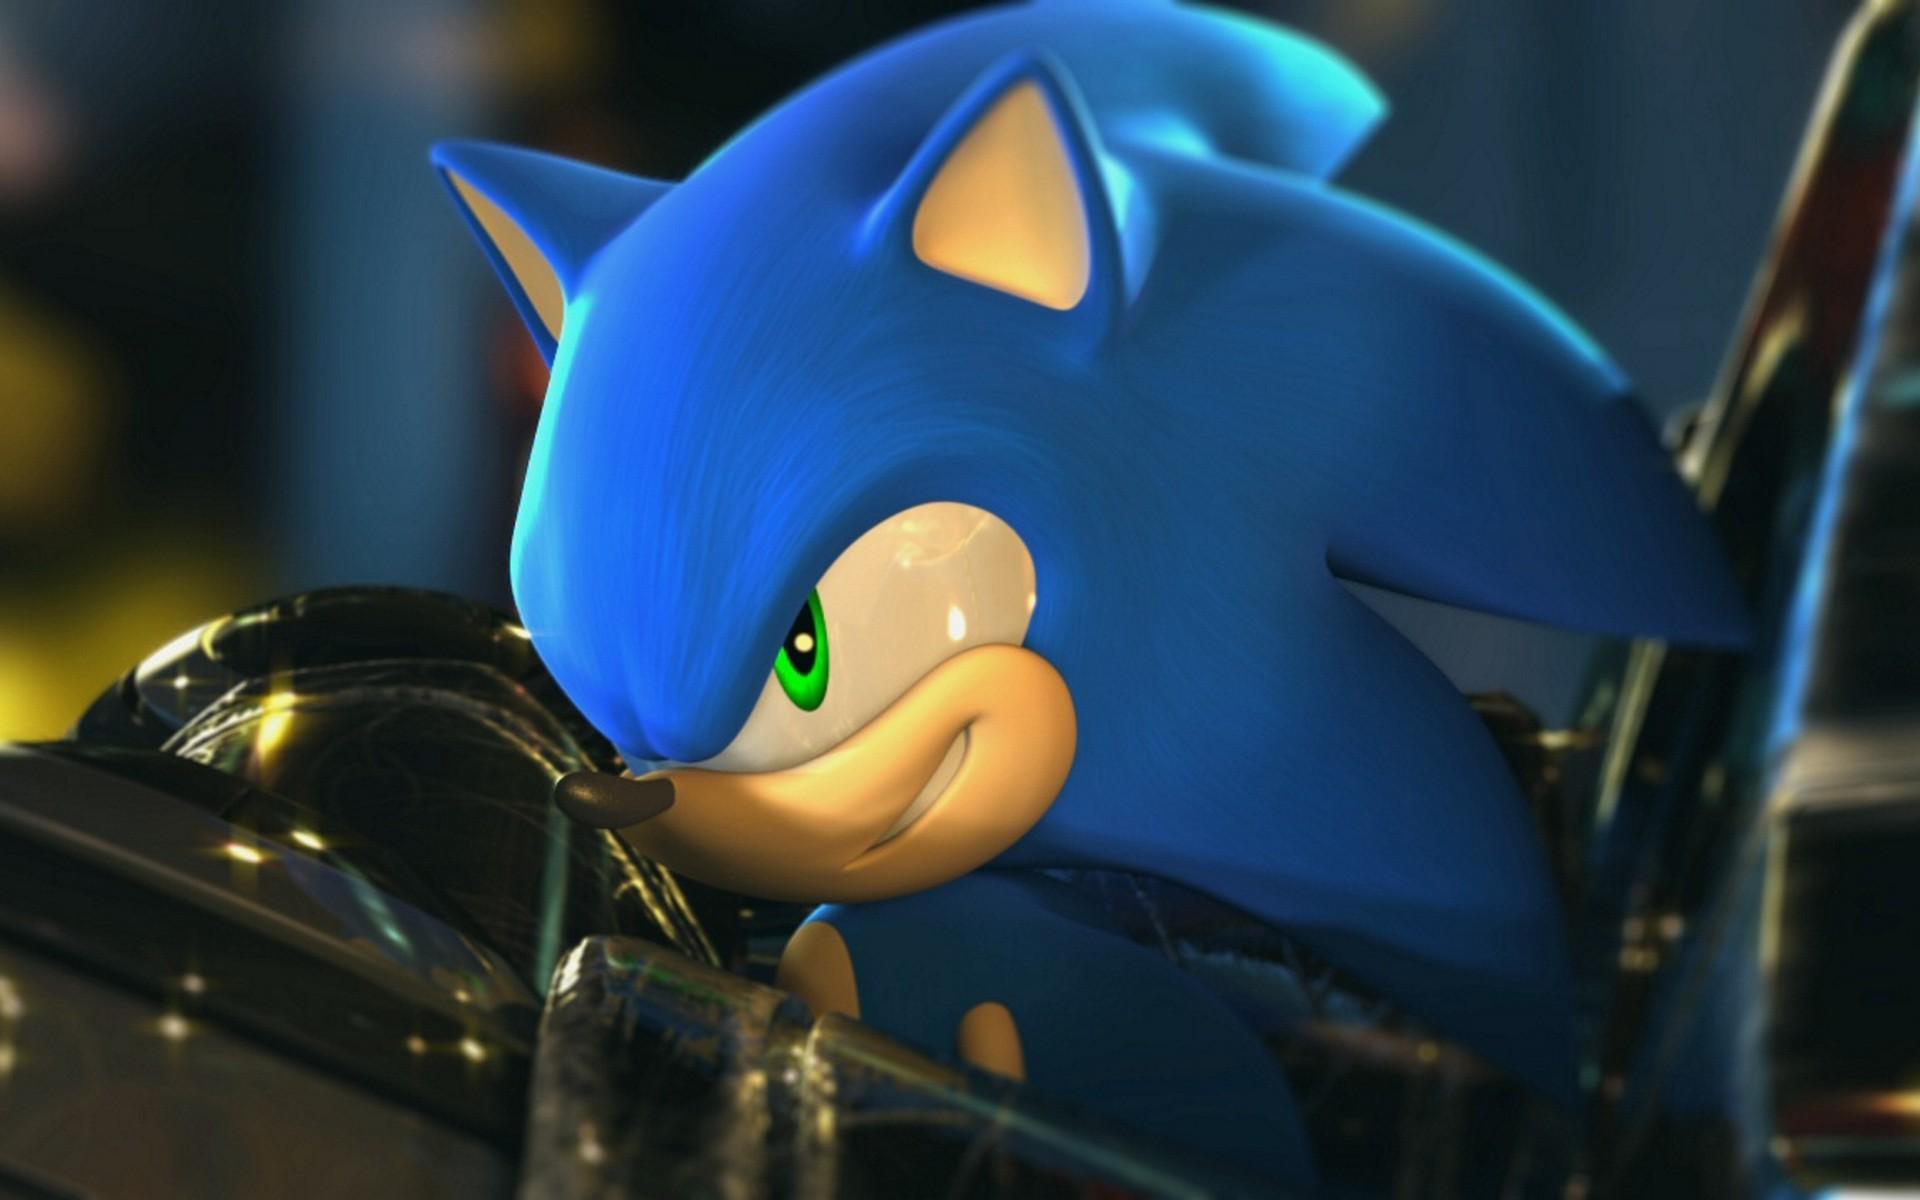 Download free sonic wallpapers.